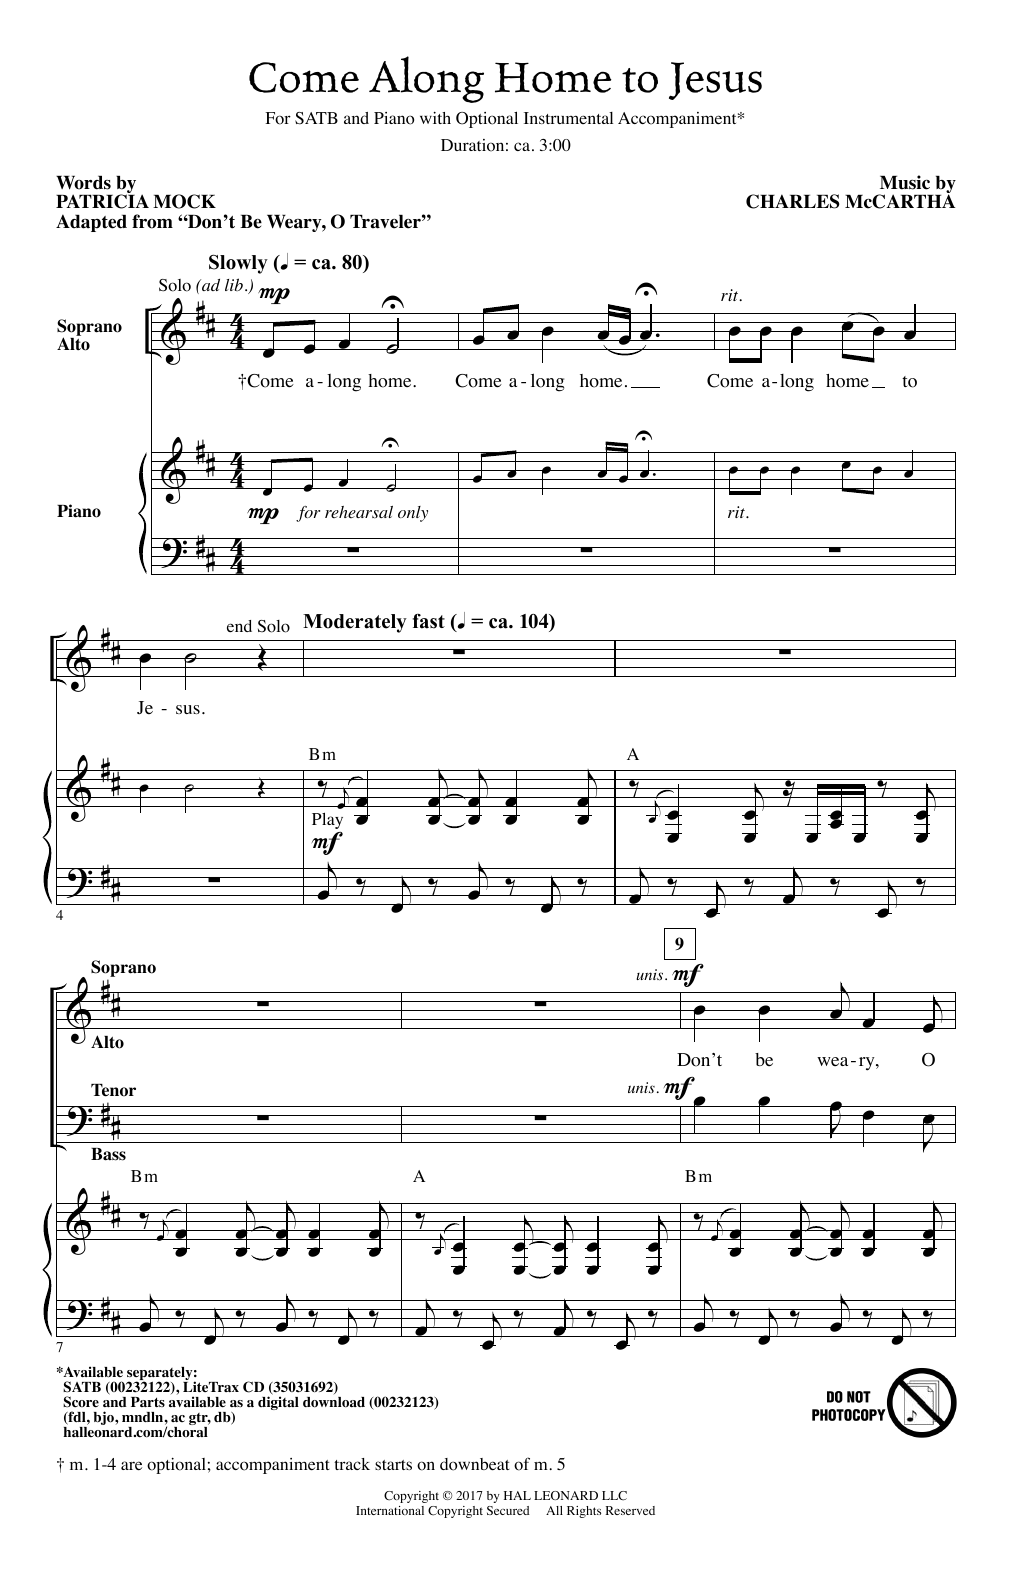 Download Charles McCartha Come Along Home To Jesus Sheet Music